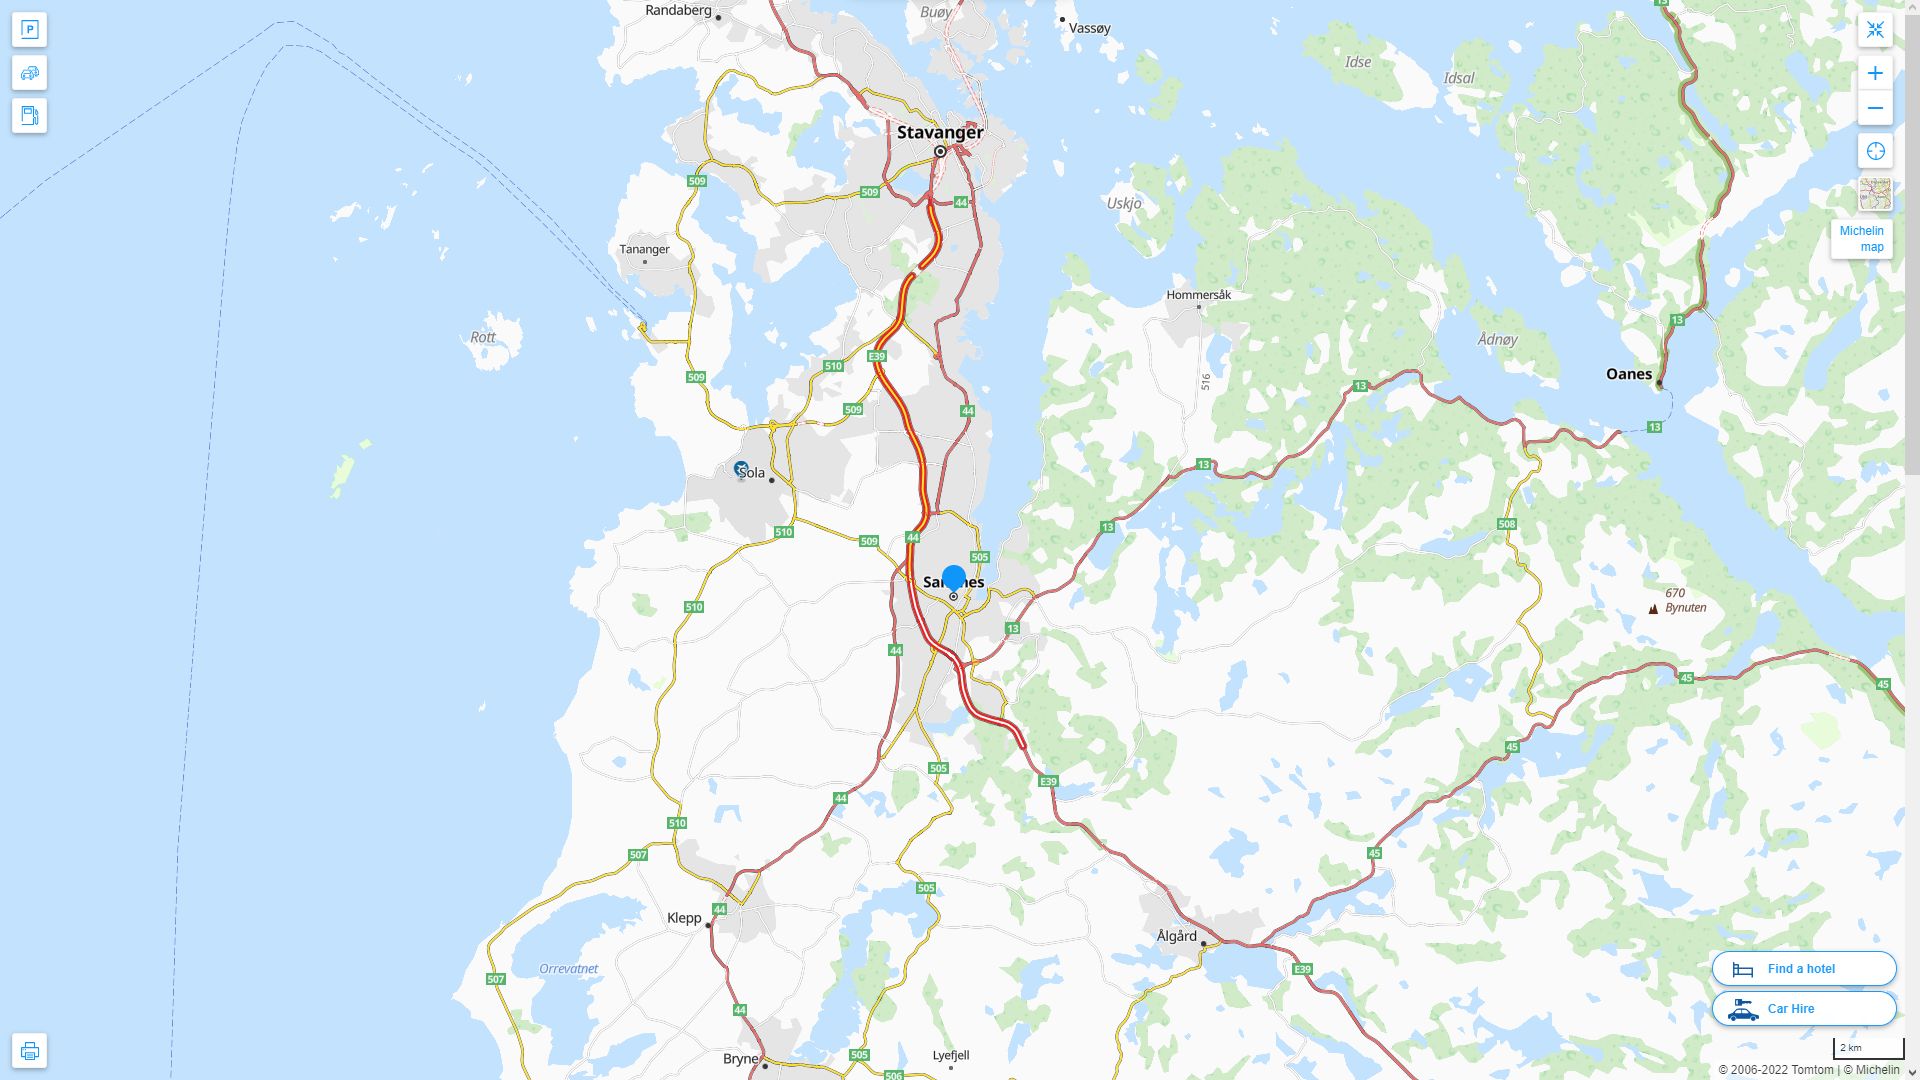 Sandnes Highway and Road Map